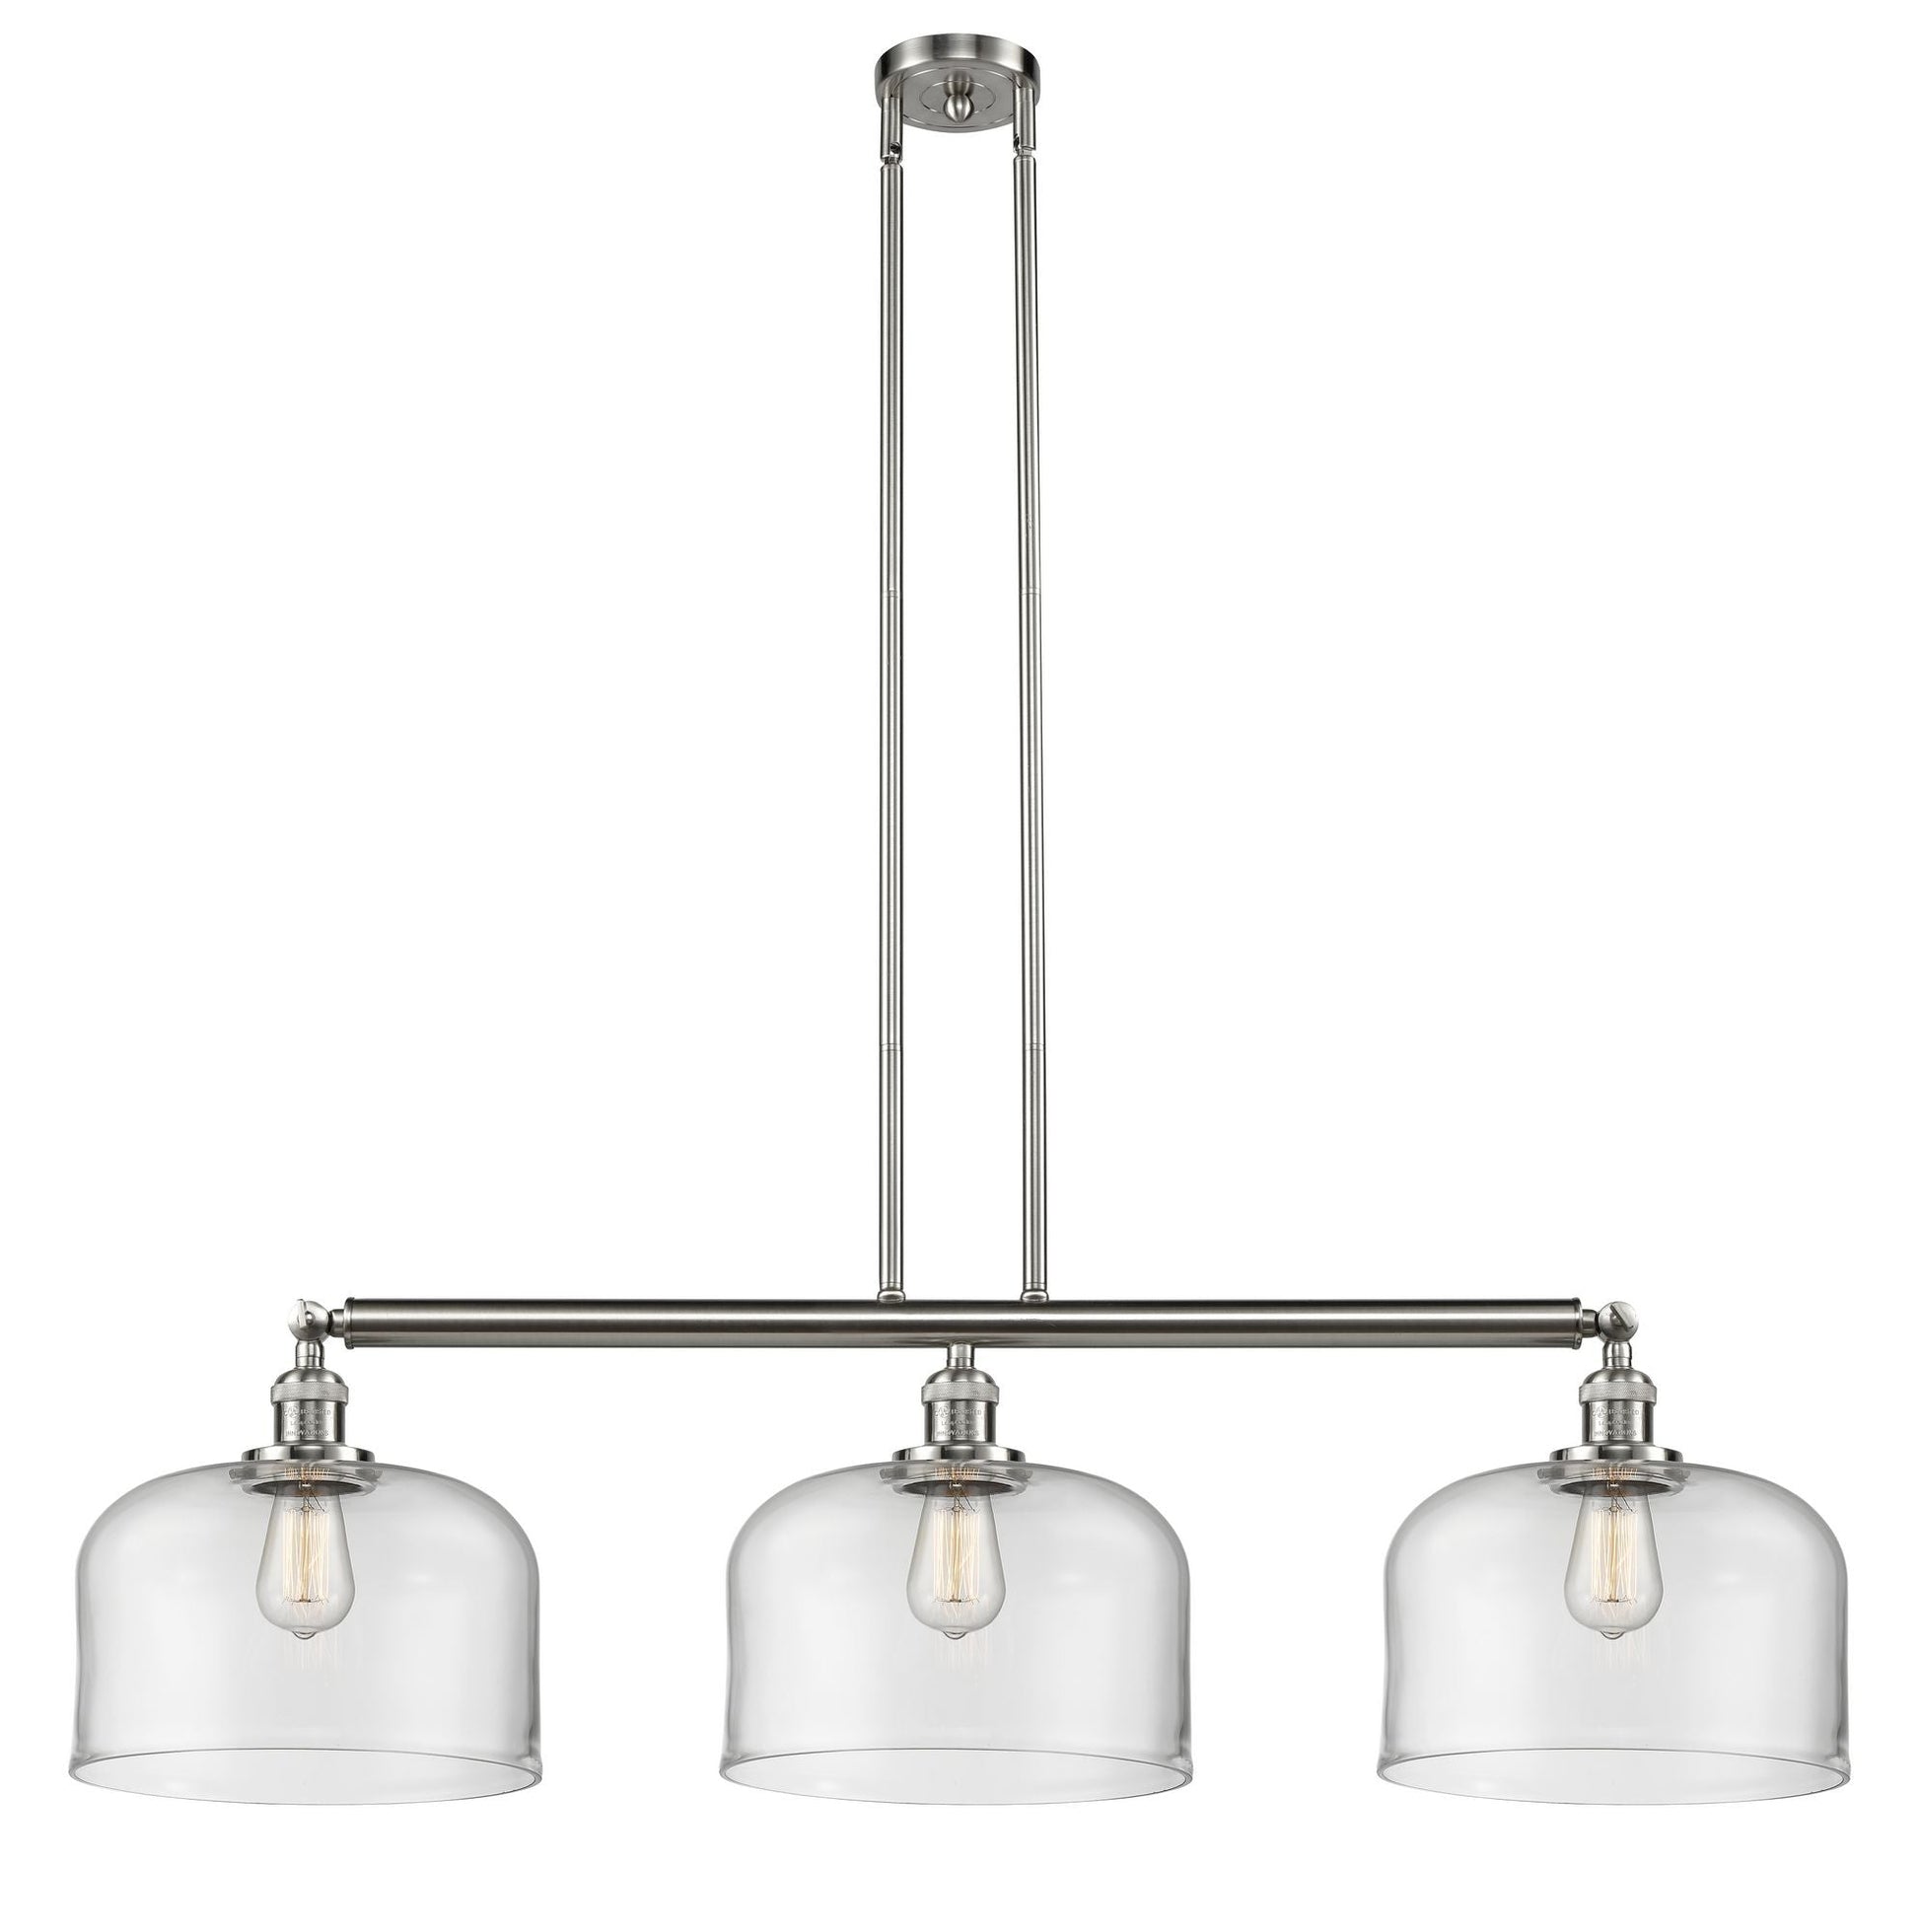 213-SN-G72-L 3-Light 42" Brushed Satin Nickel Island Light - Clear X-Large Bell Glass - LED Bulb - Dimmensions: 42 x 12 x 13<br>Minimum Height : 22.25<br>Maximum Height : 46.25 - Sloped Ceiling Compatible: Yes